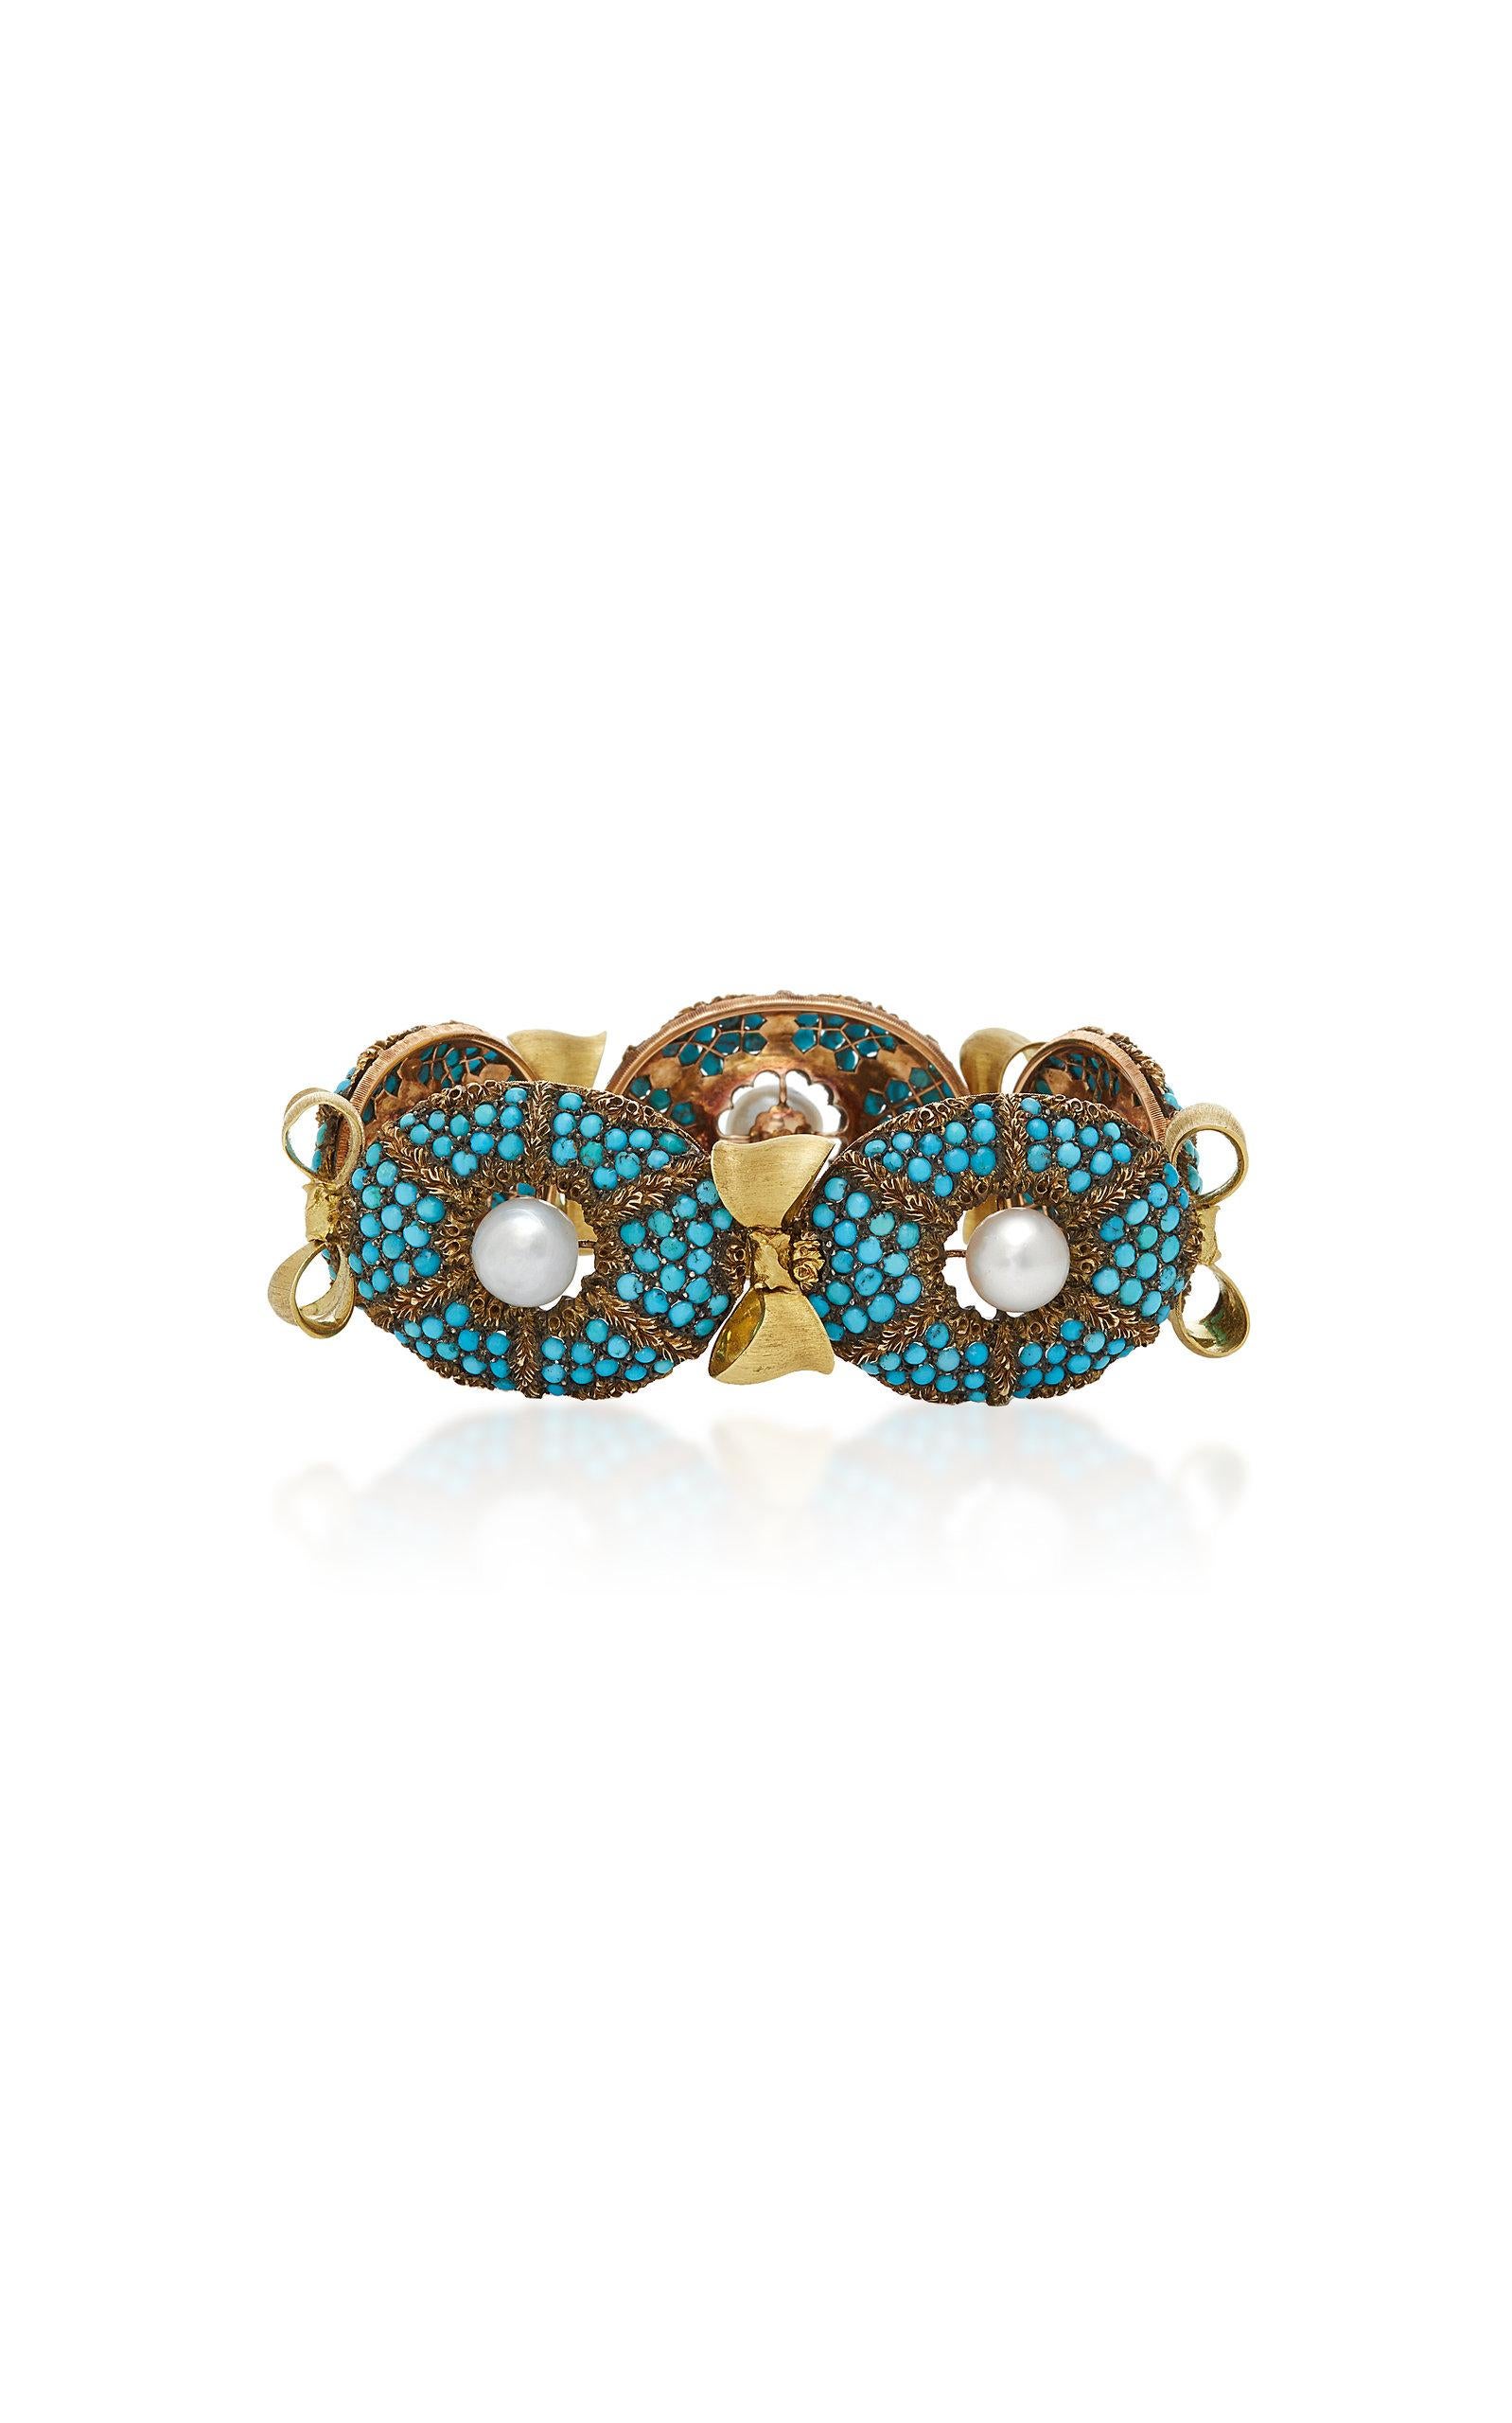 Buccellati bracelet in 18kt yellow gold, composed of five oval panels, each with cultured pearl center to a pavé-set turquoise cabochon cluster surround interspersed with chased leaf detailing, joined by tied bow design connections with engraved